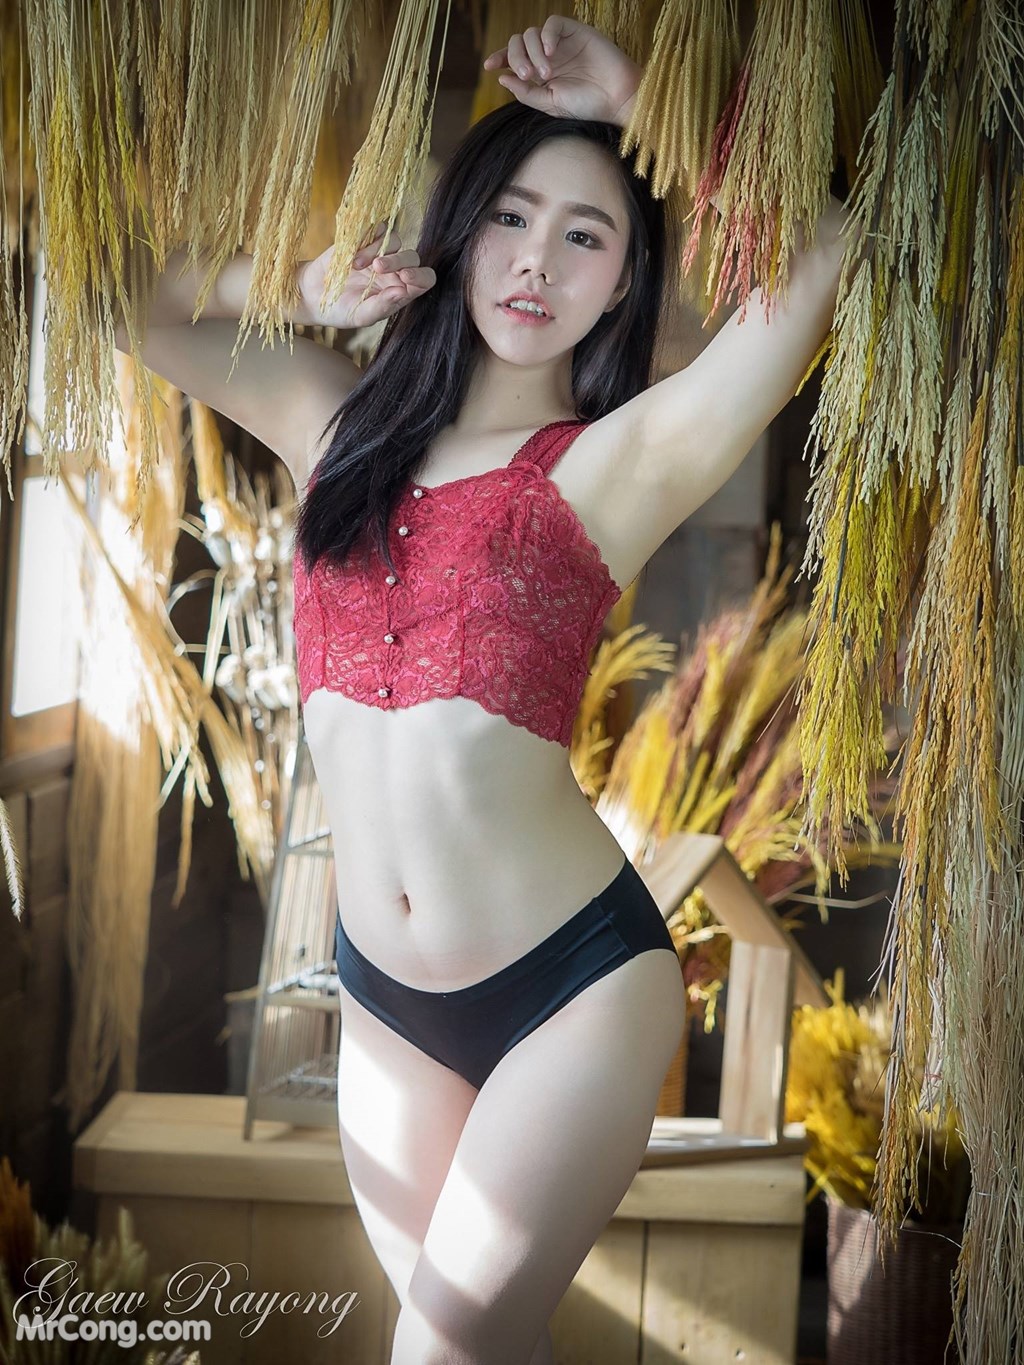 Nam-Khing Pakhawalayhs beauty shows off super hot body with underwear (34 photos) photo 1-0